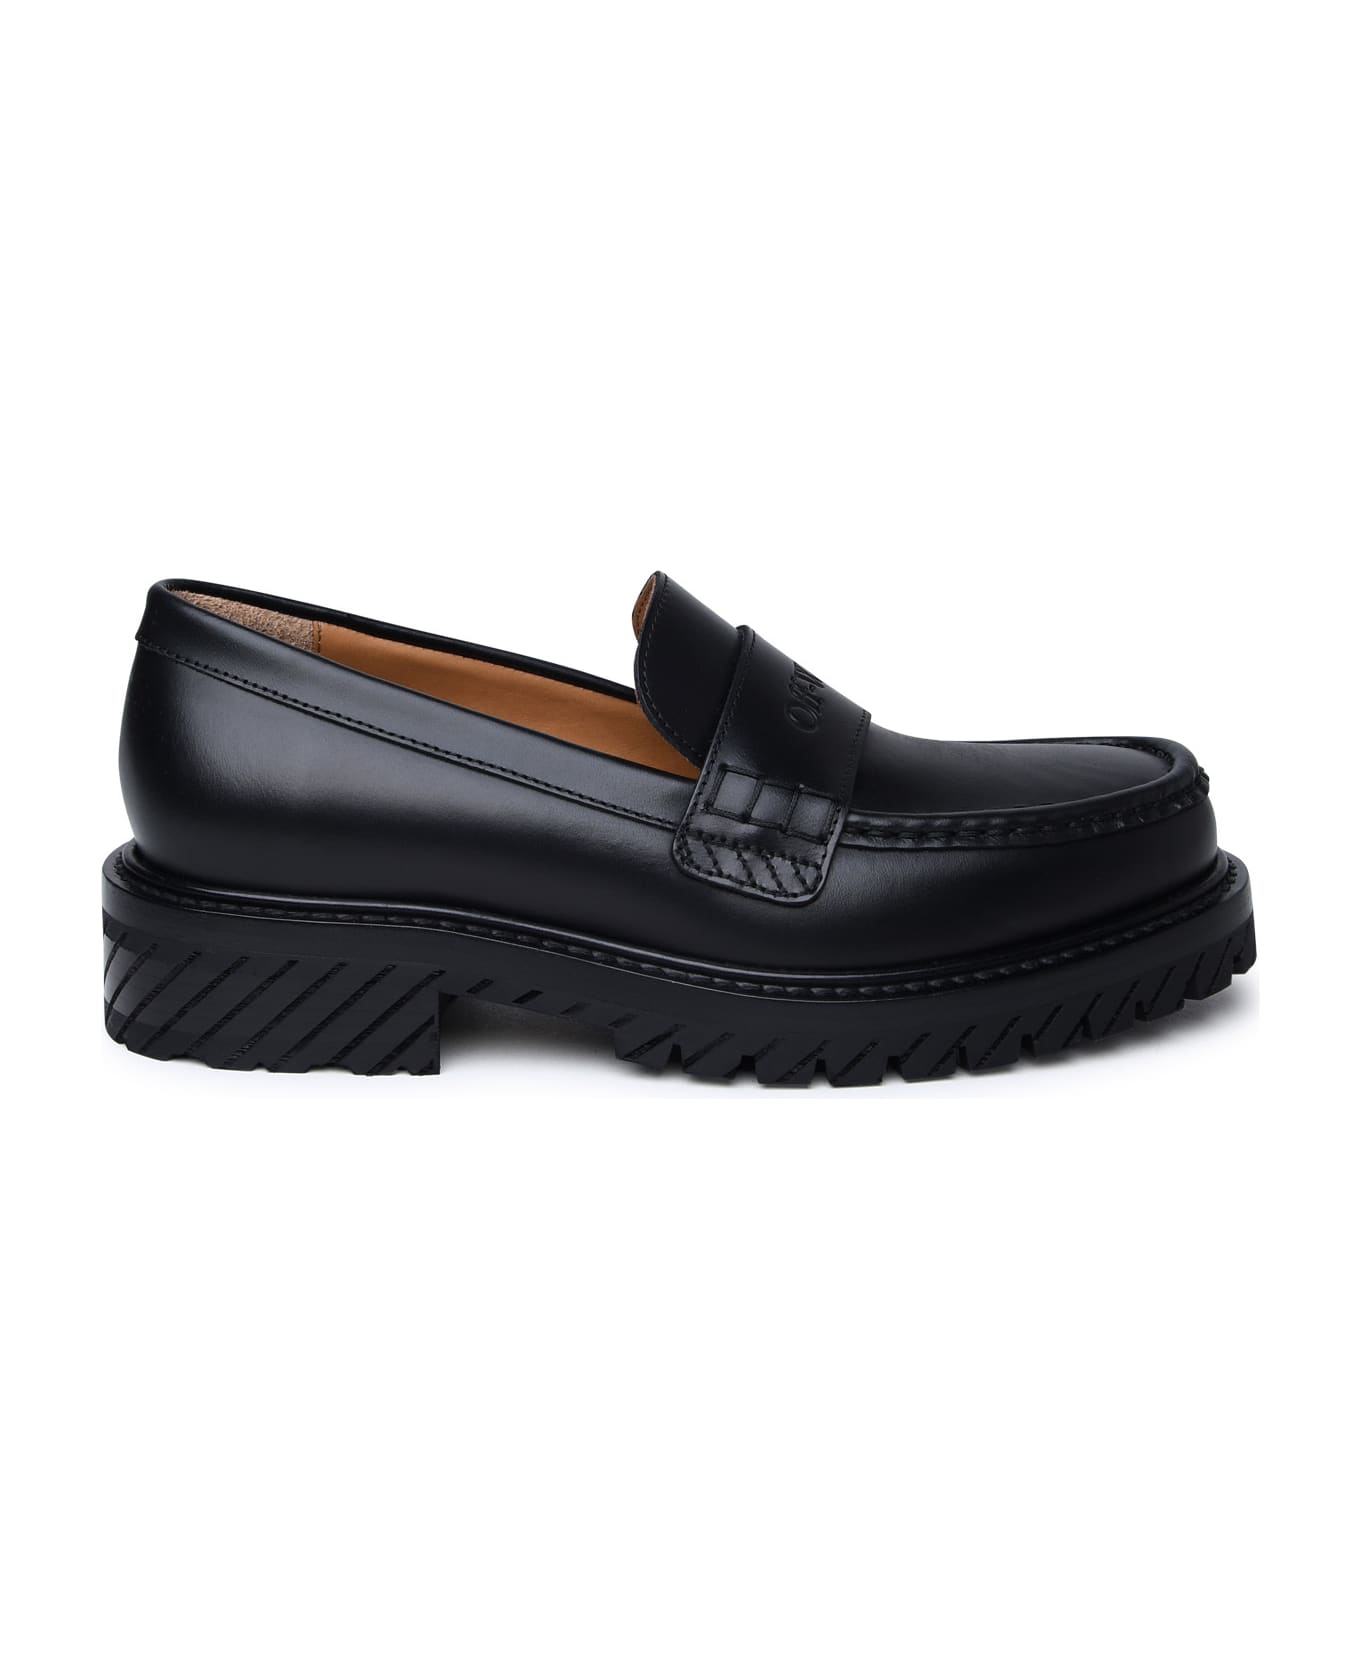 Off-White Black Leather Loafers - Black